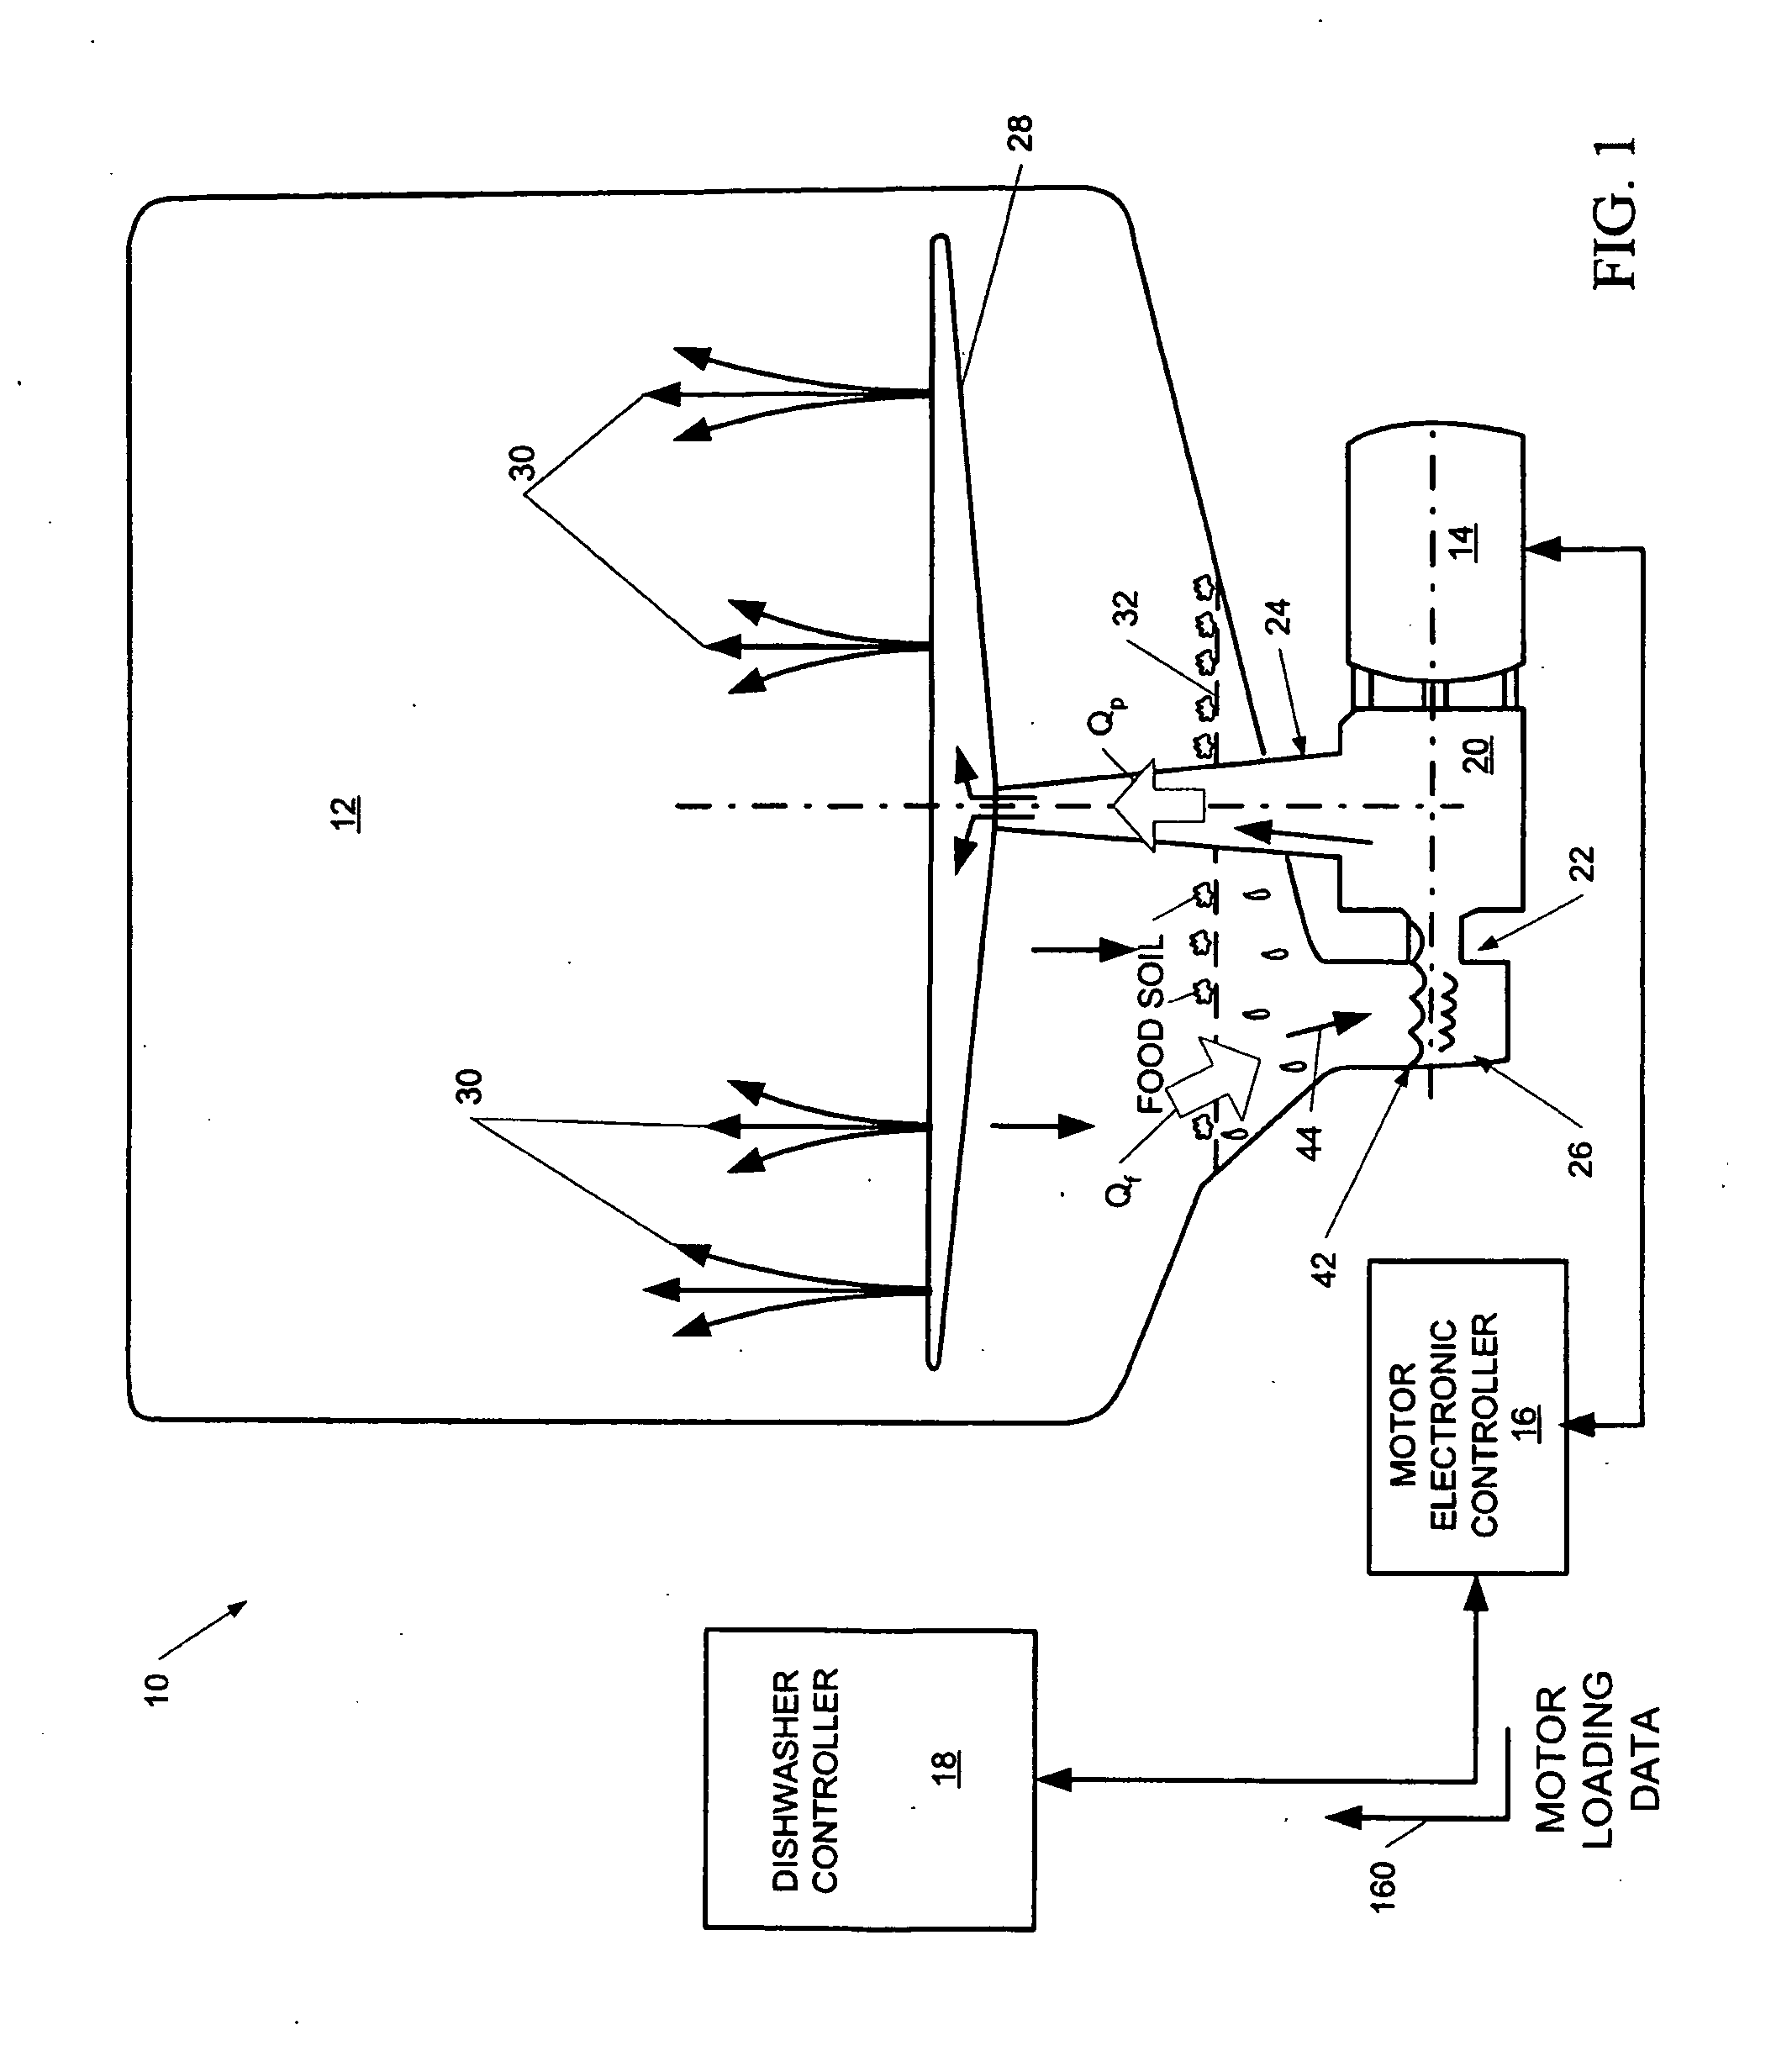 Dishwasher with controlled induction motor/pump